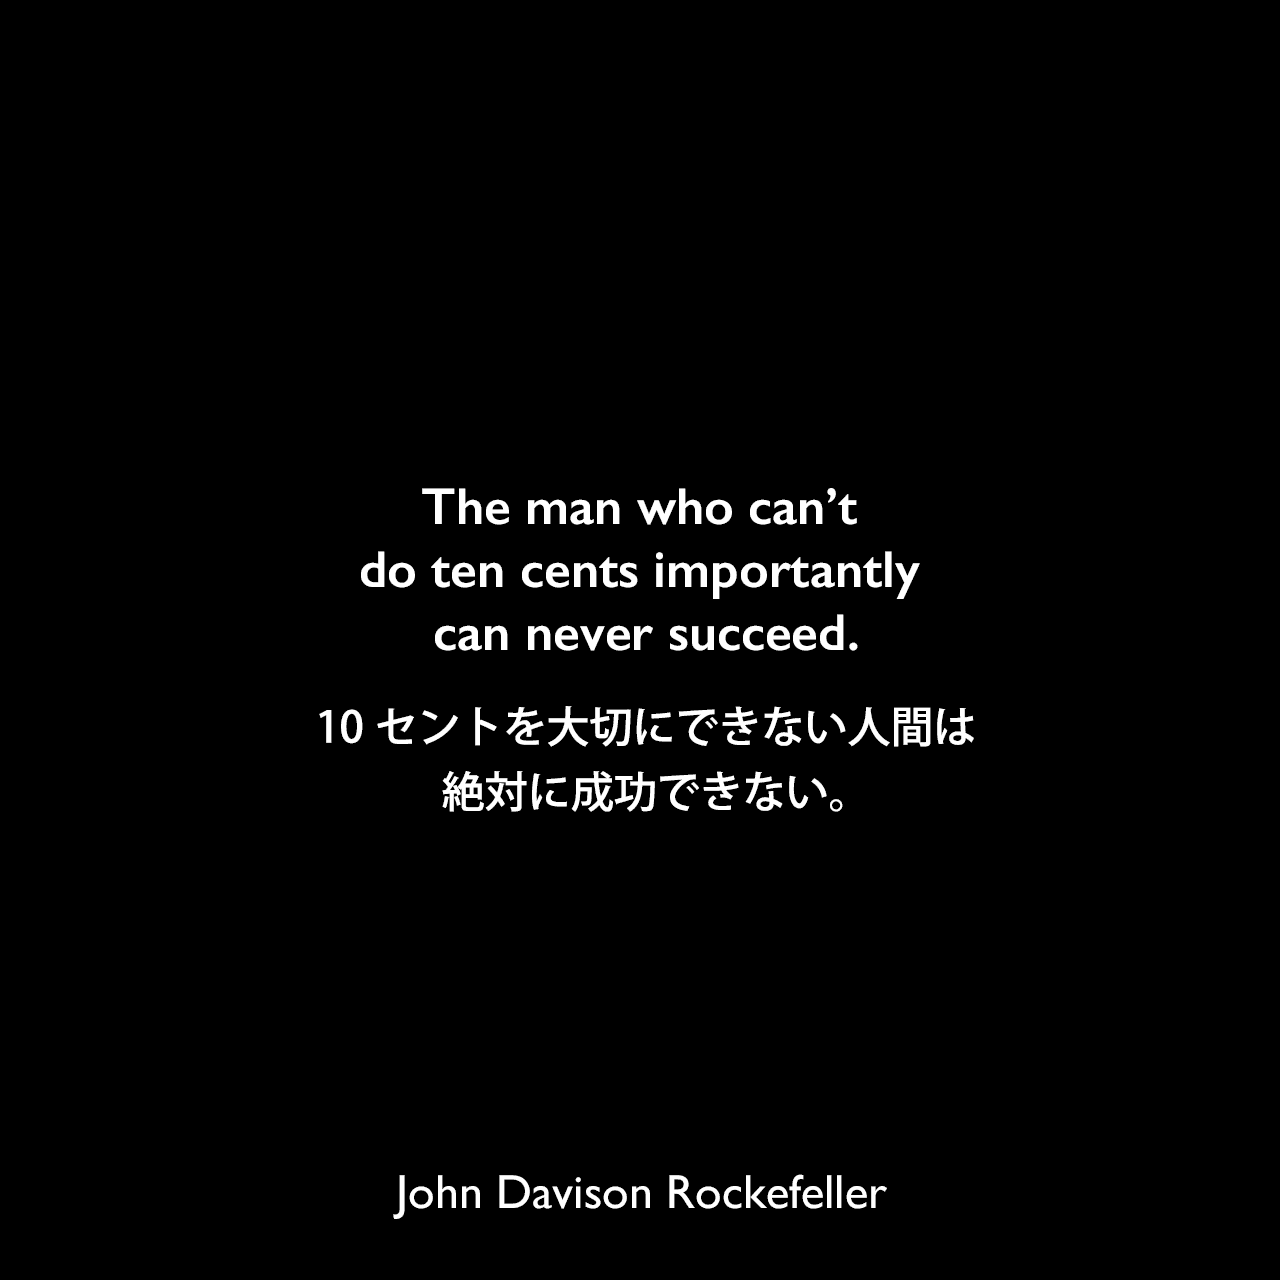 The man who can’t do ten cents importantly can never succeed.10セントを大切にできない人間は、絶対に成功できない。John Davison Rockefeller